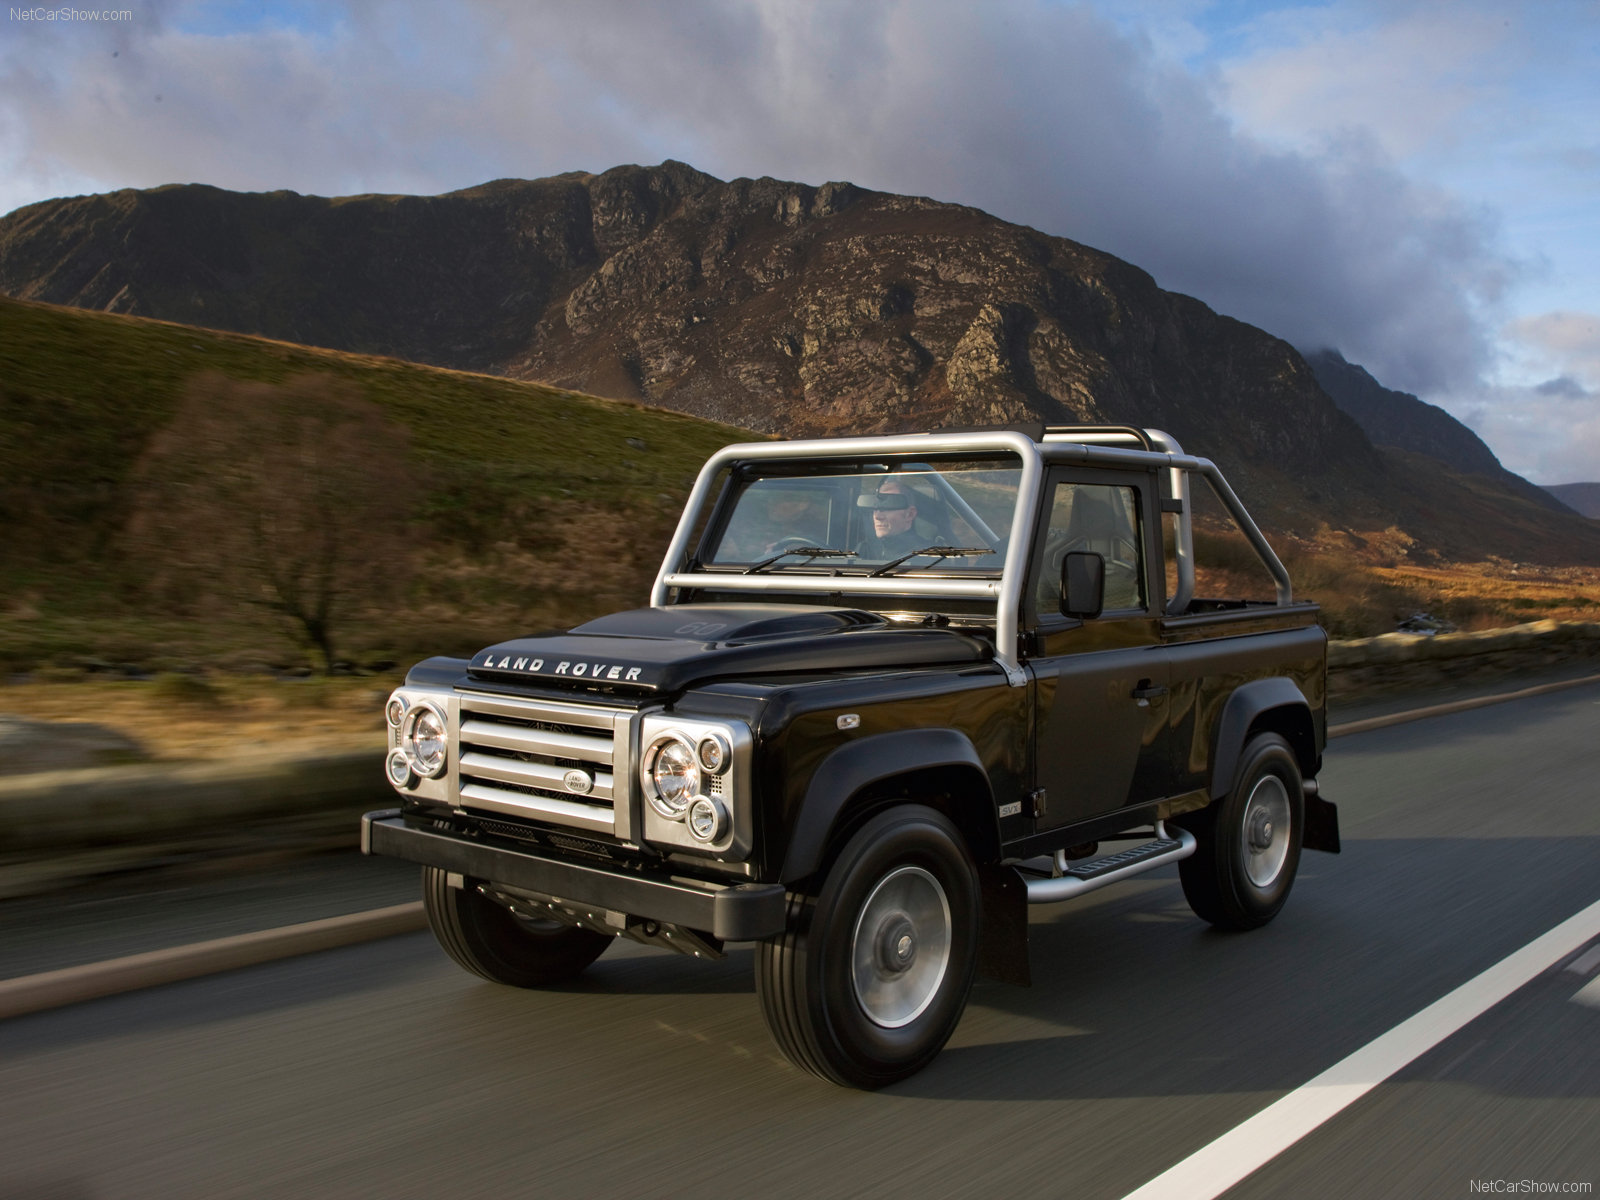 Download High quality black jeep Land Rover wallpaper / 1600x1200